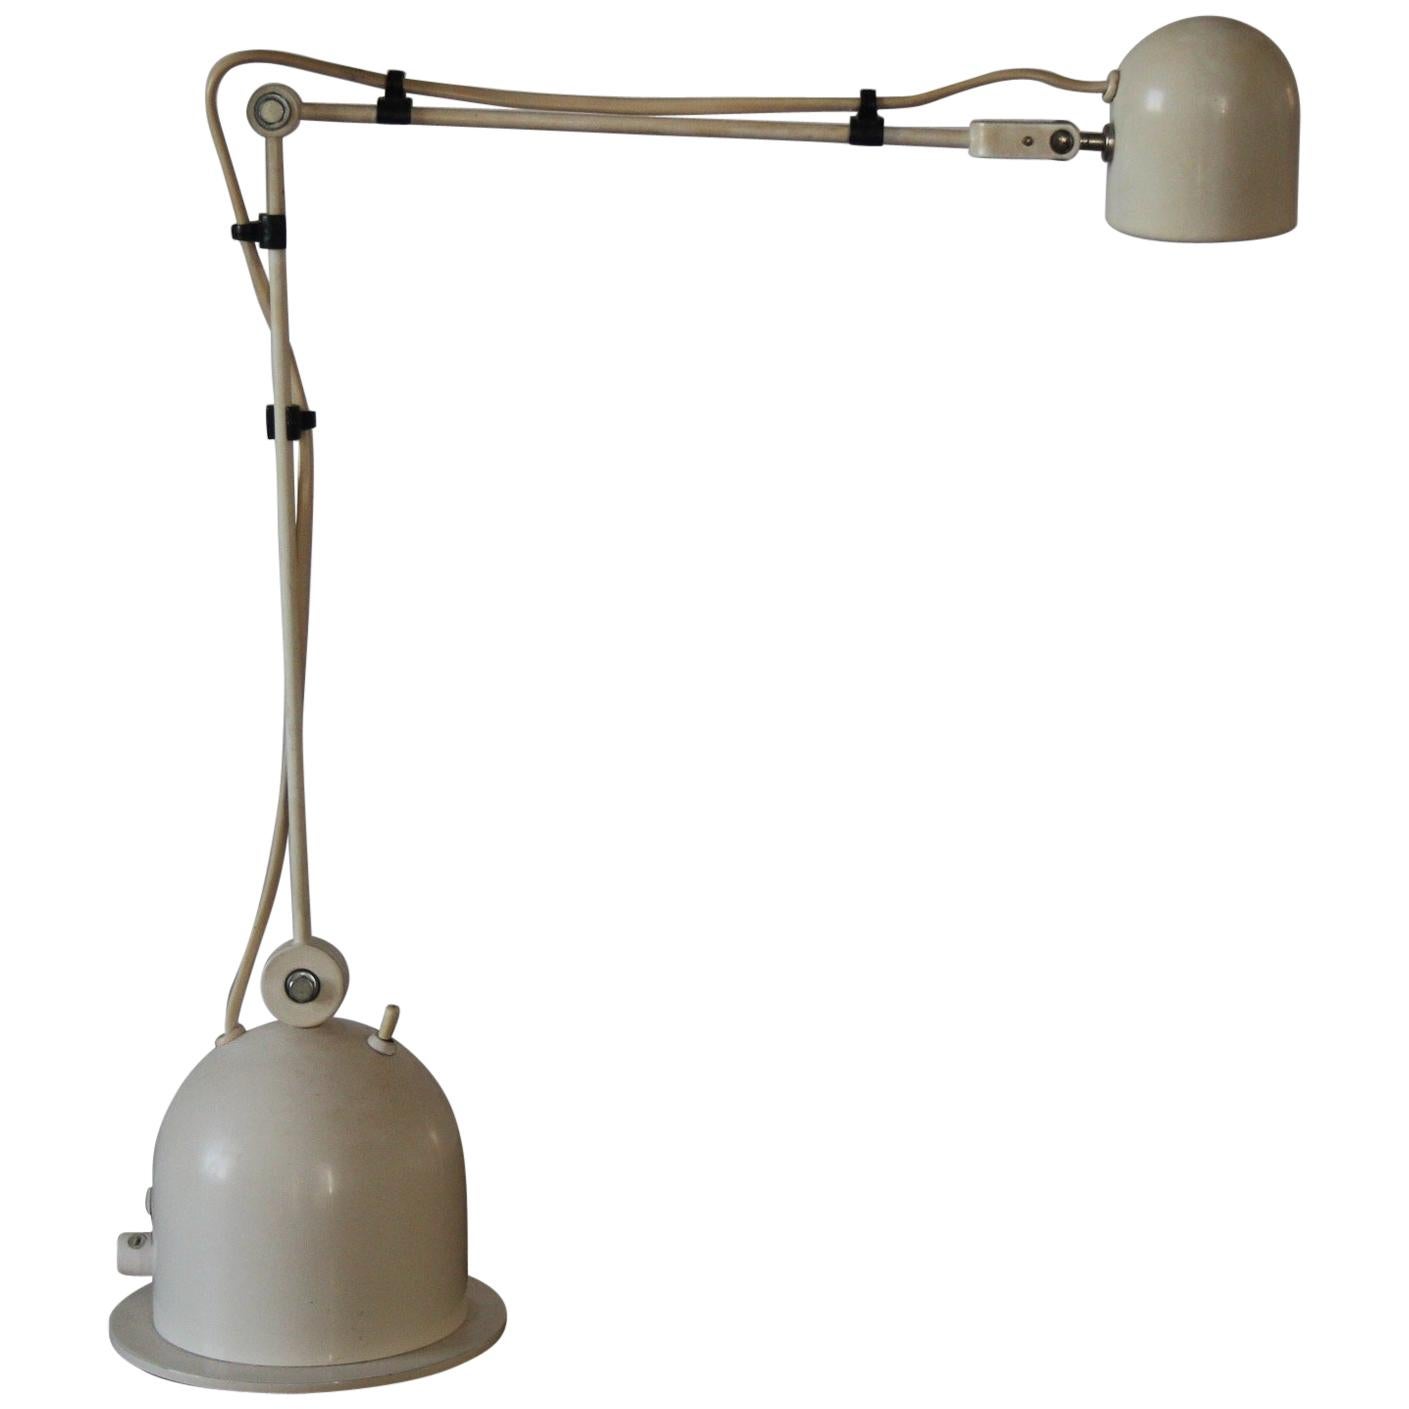 Articulated Table Lamp